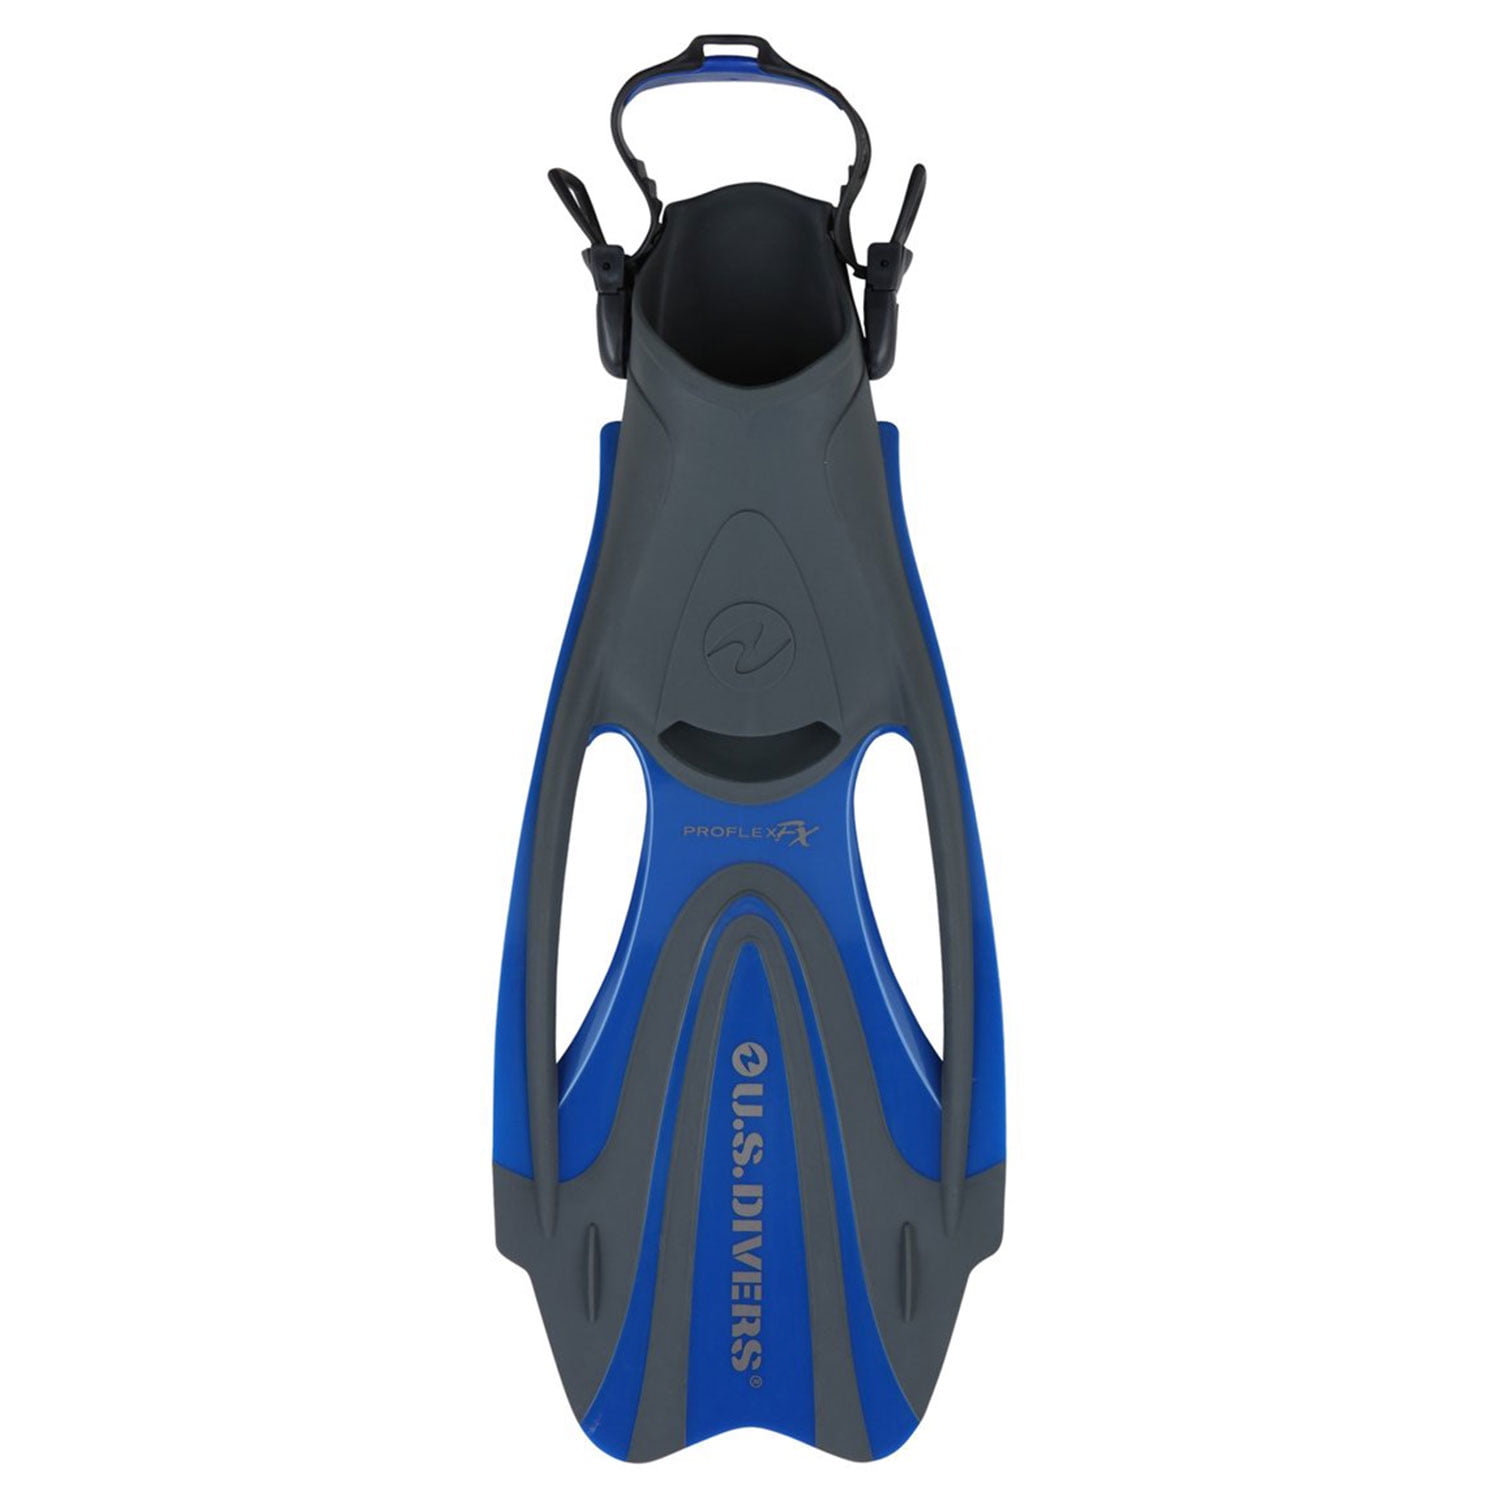 AQUA LUNG SPORT SNORKEL FINS QUICK-RELEASE LEASH SYSTEM TO KEEP FINS ON! 